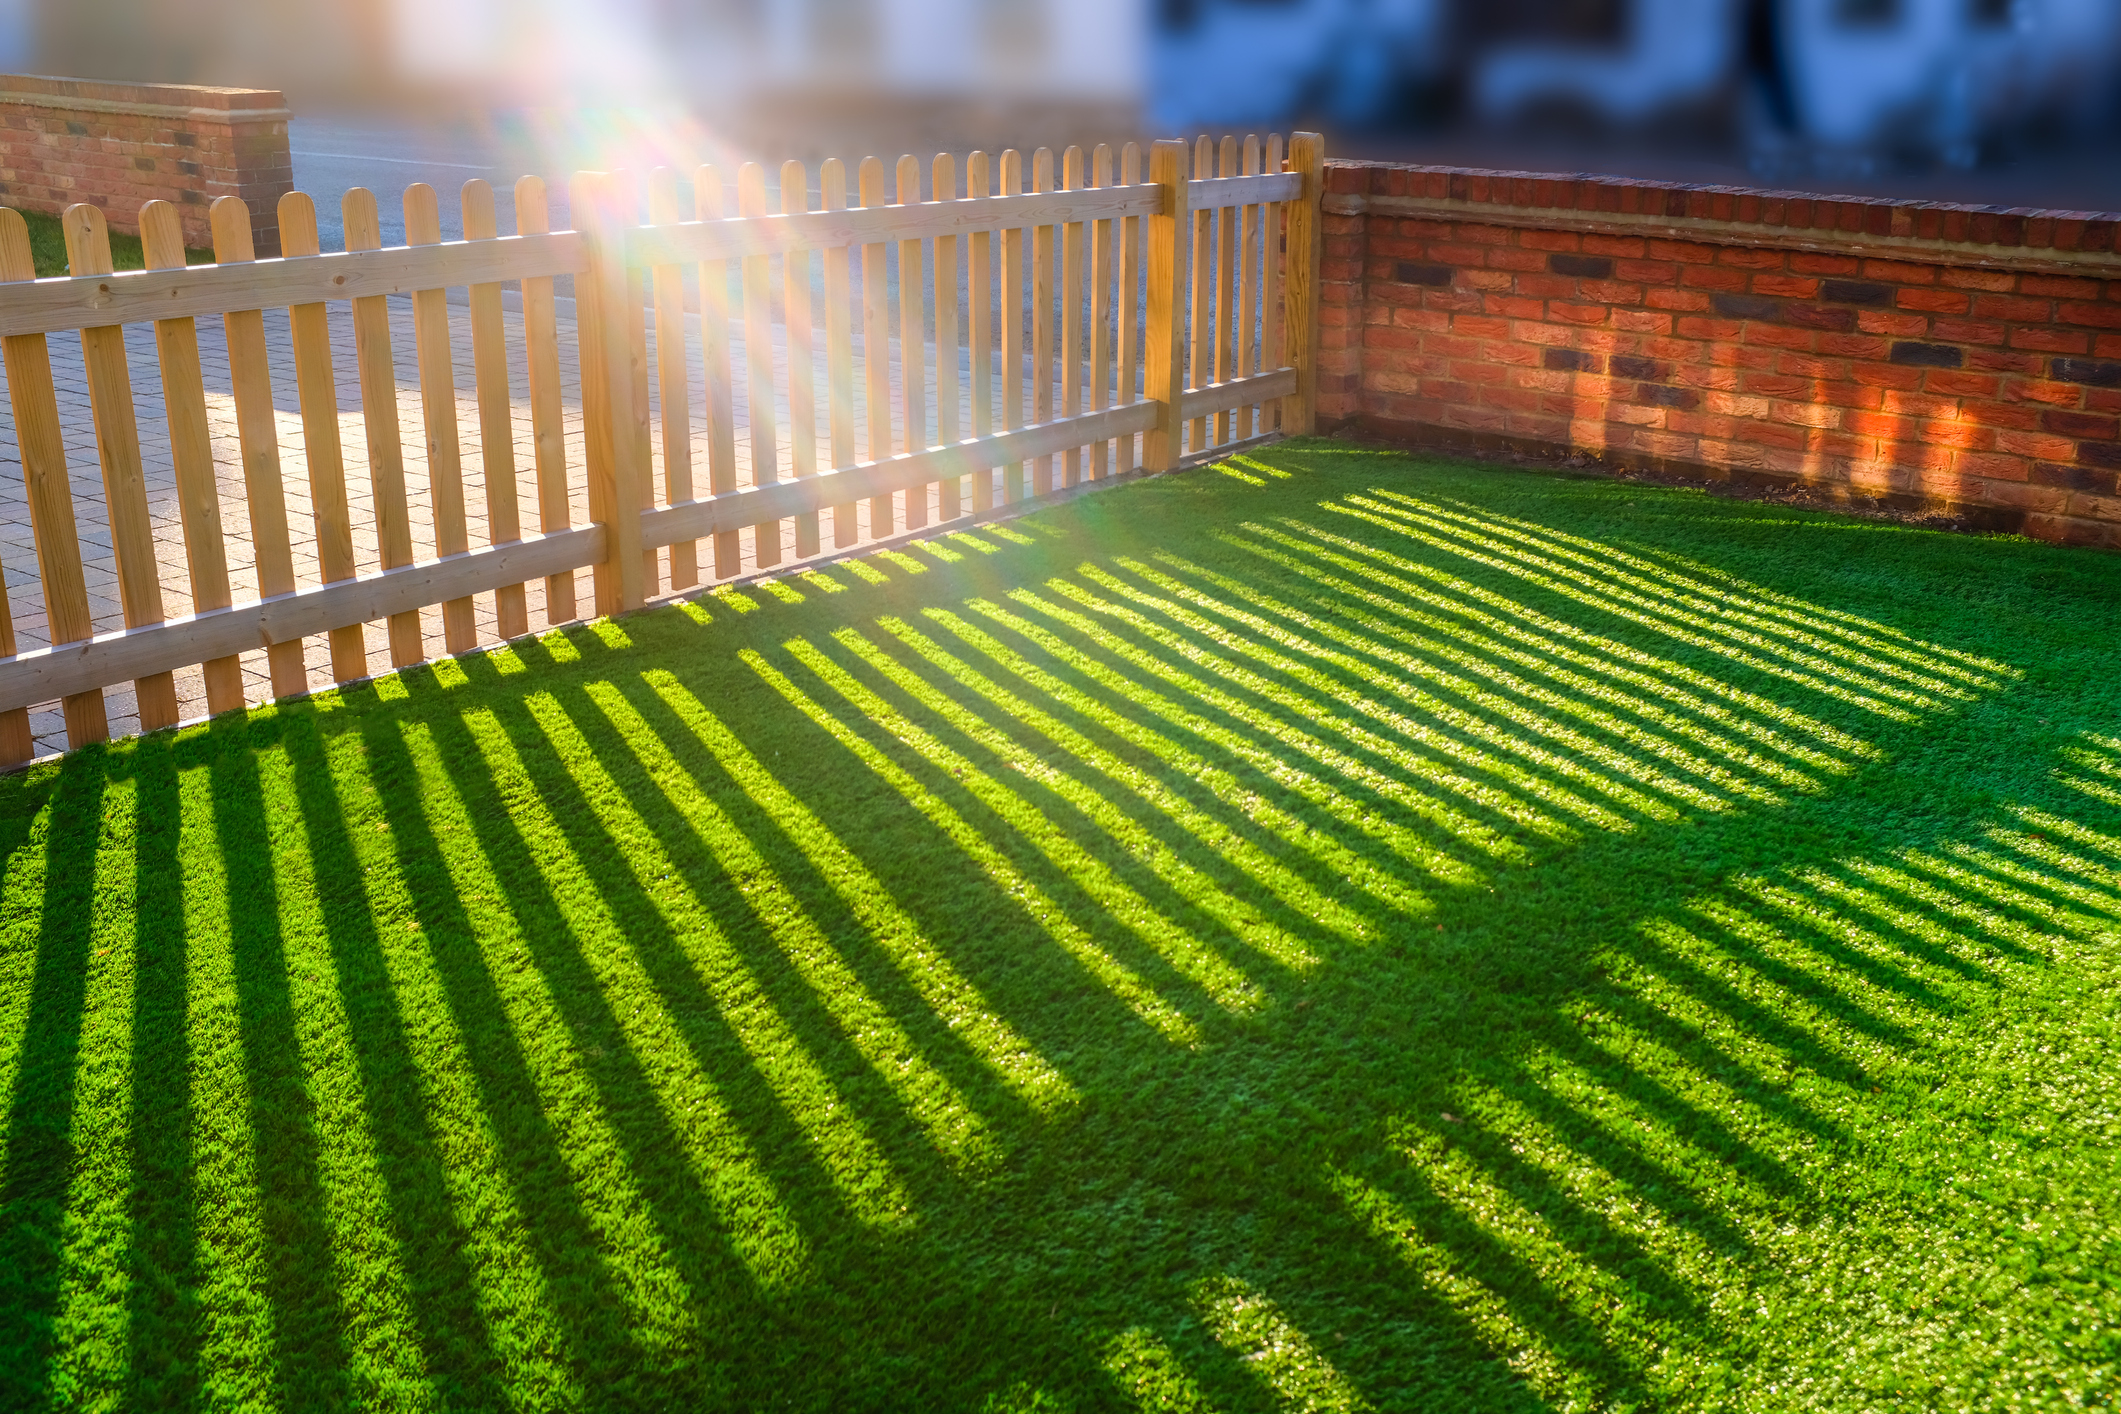 Basic Tools You Will Need for Synthetic Lawn Maintenance